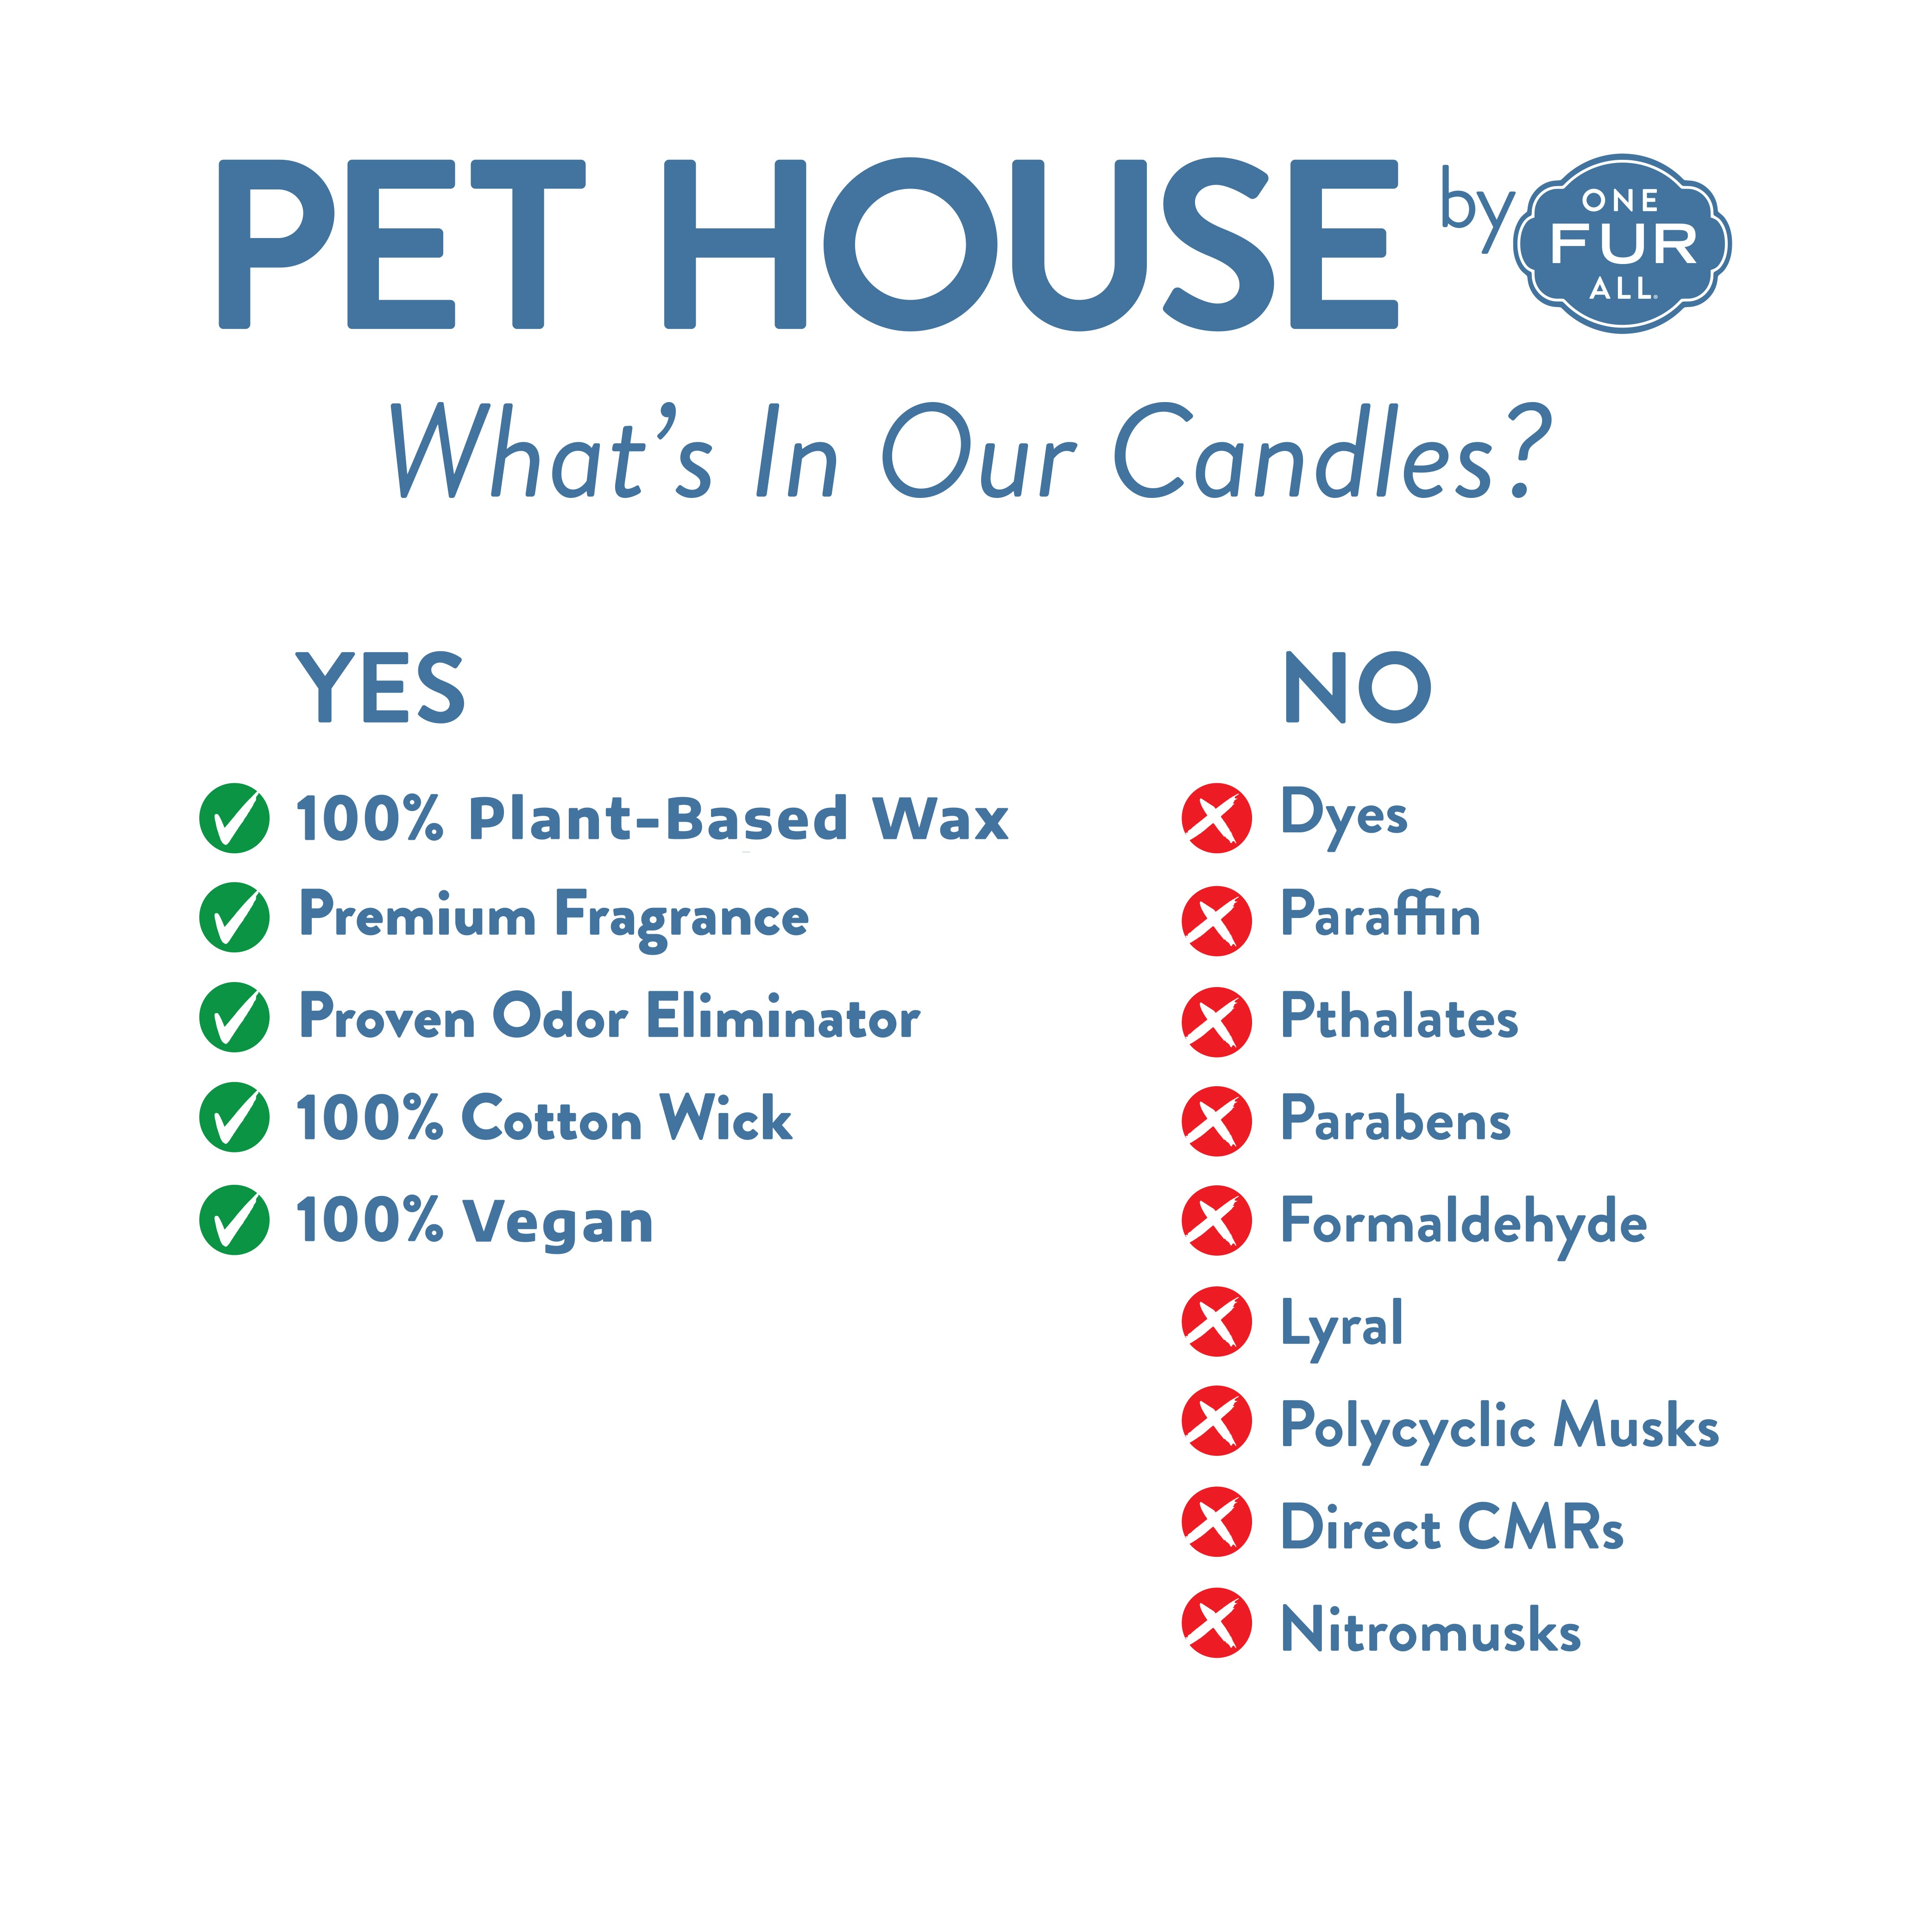 What's in Our Candles